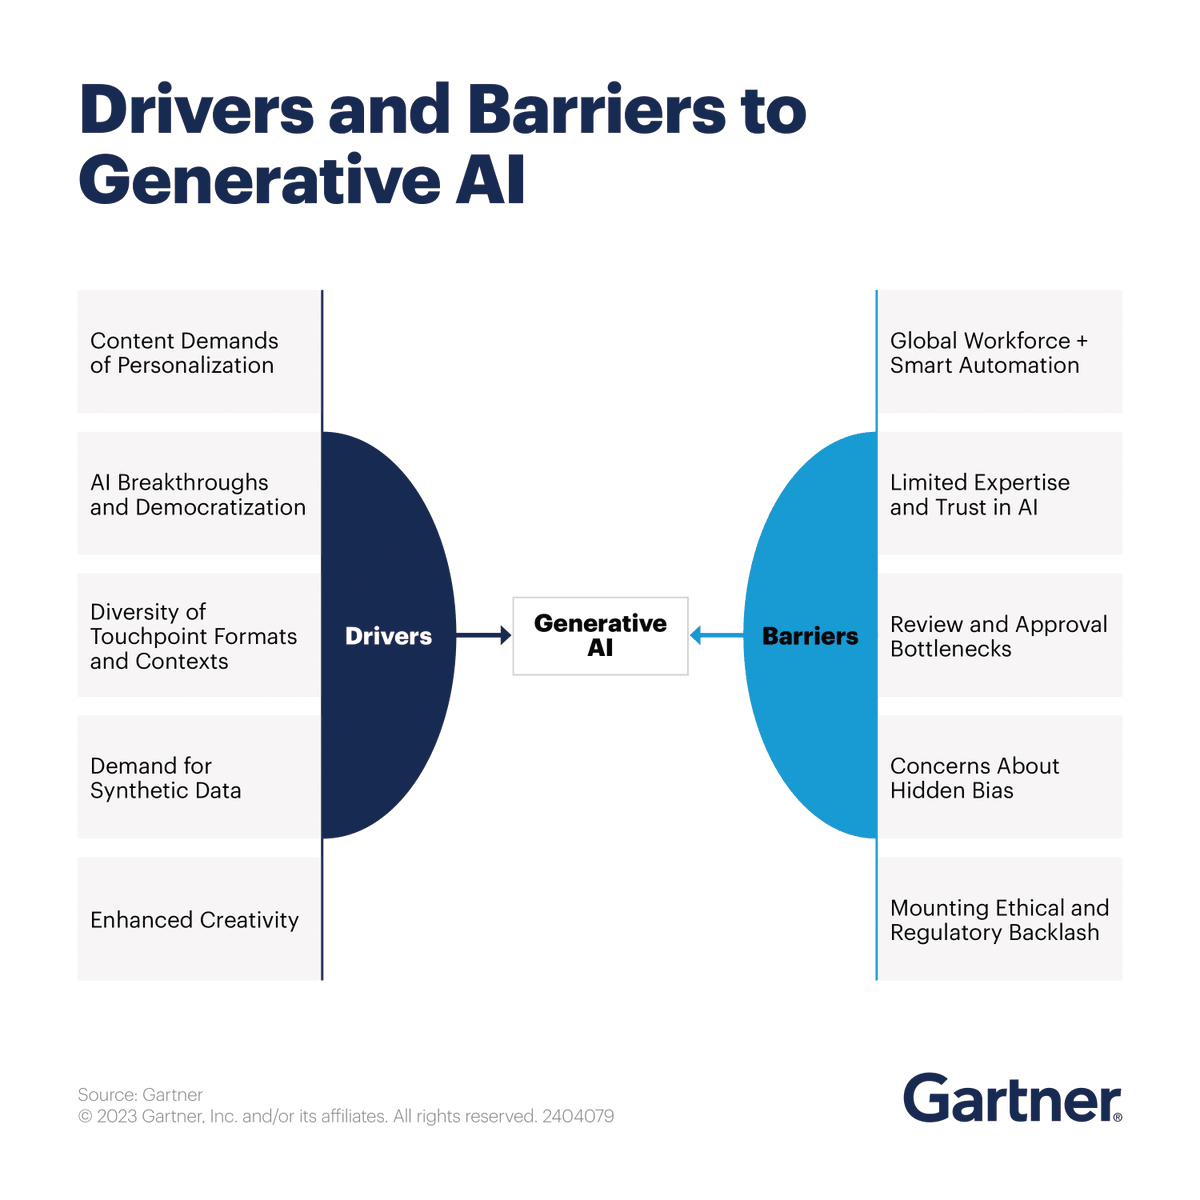 As with any innovation, executive leaders must understand the drivers and barriers that come with using generative AI. Explore the proven applications of generative AI to enhance your content experience: gtnr.it/3EjJeWc #GartnerIT #AI #GenerativeAI